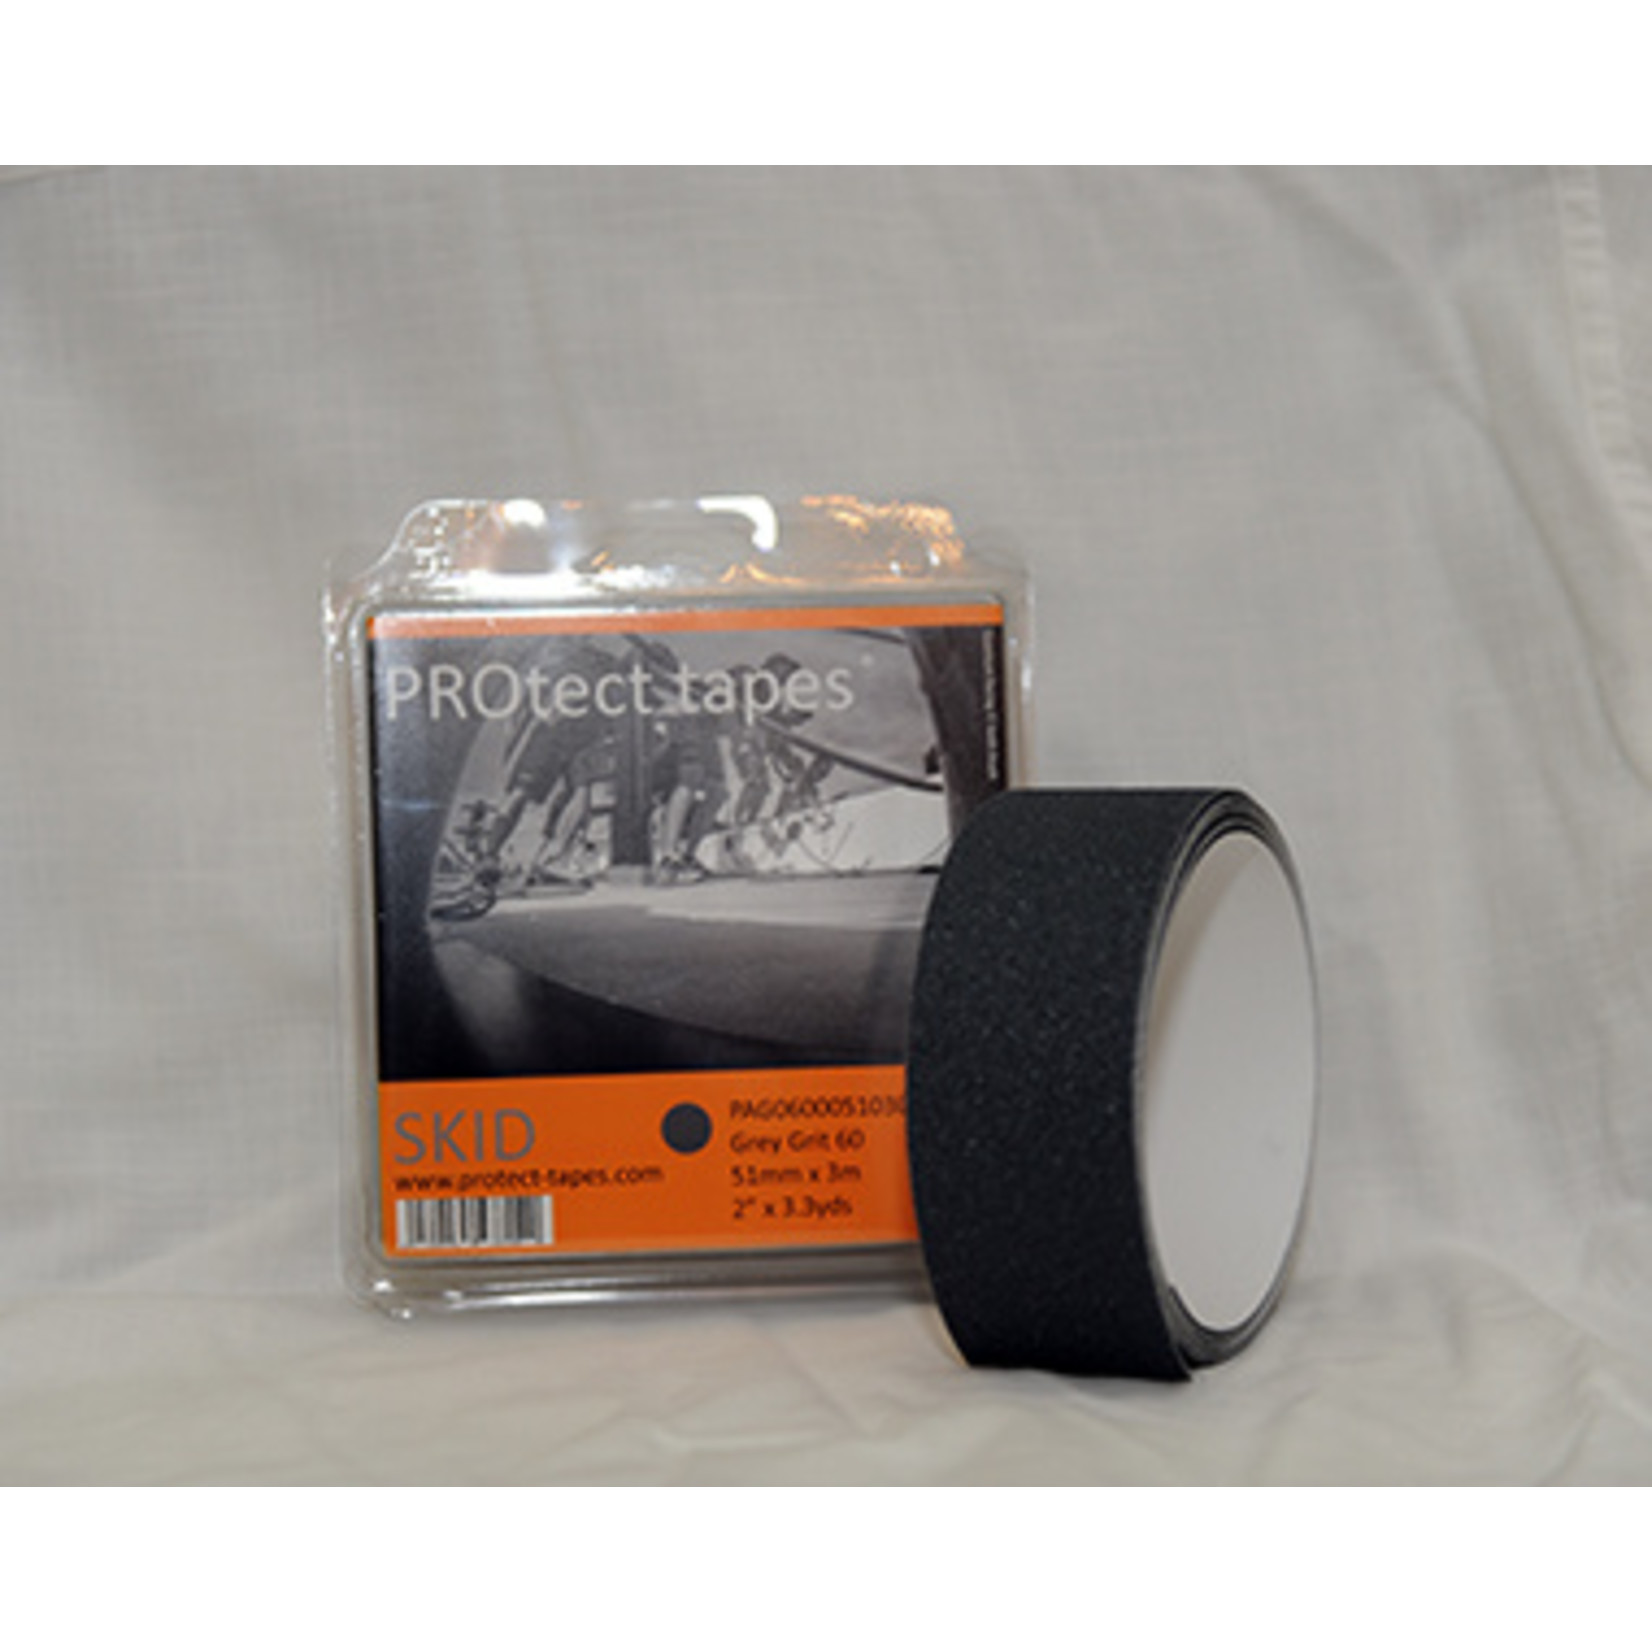 PROtect Tapes Skid 60 grit 51mm x 3m grey